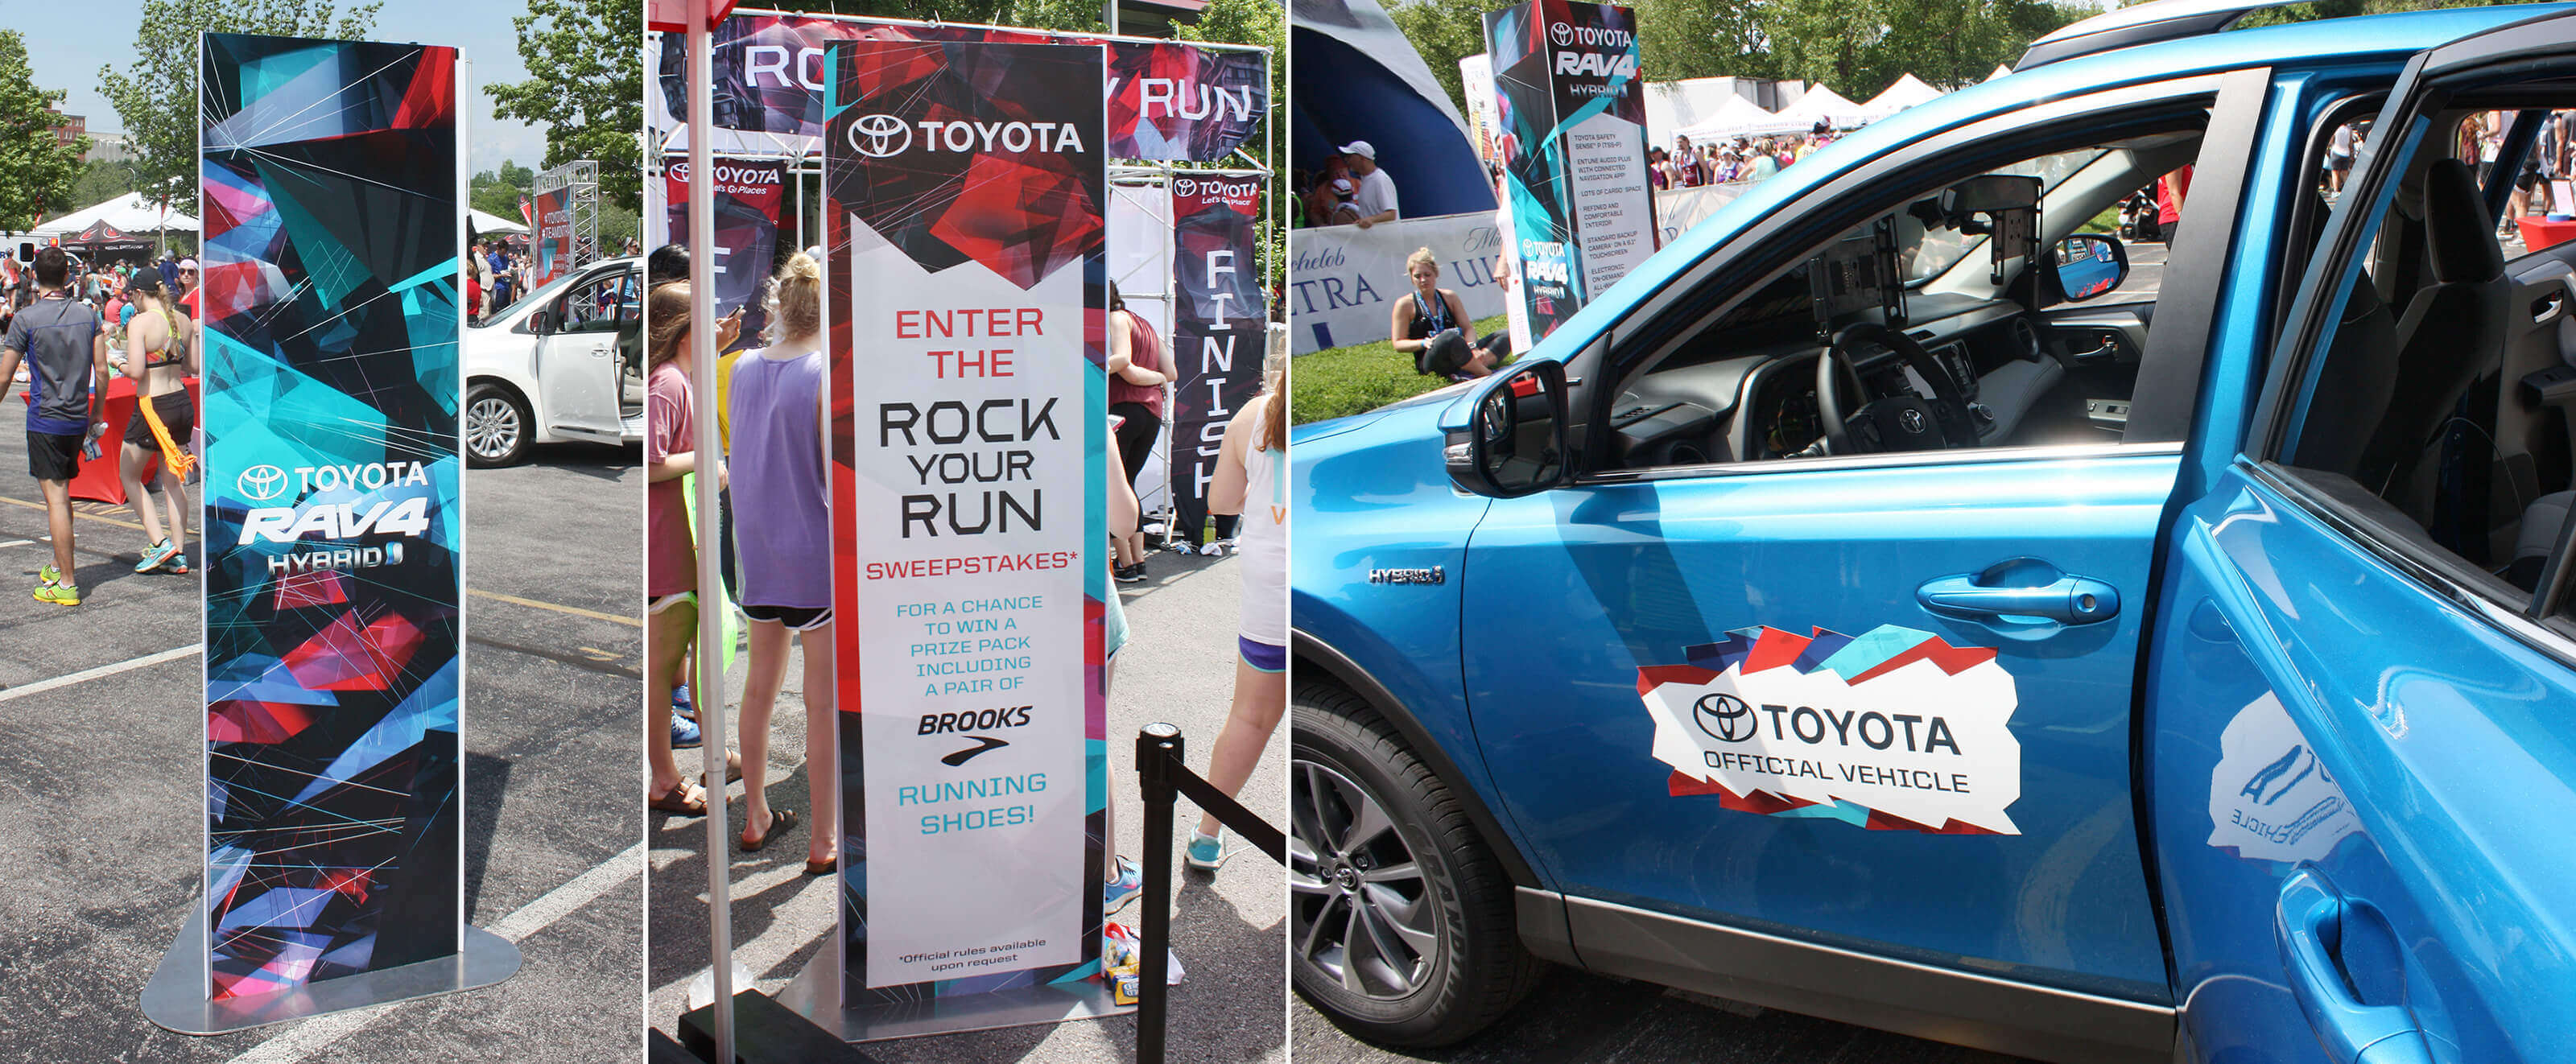 Photos of the Toyota Rock Your Run event featuring a Rav4 2x7 TFE and Rav4 door magnet.